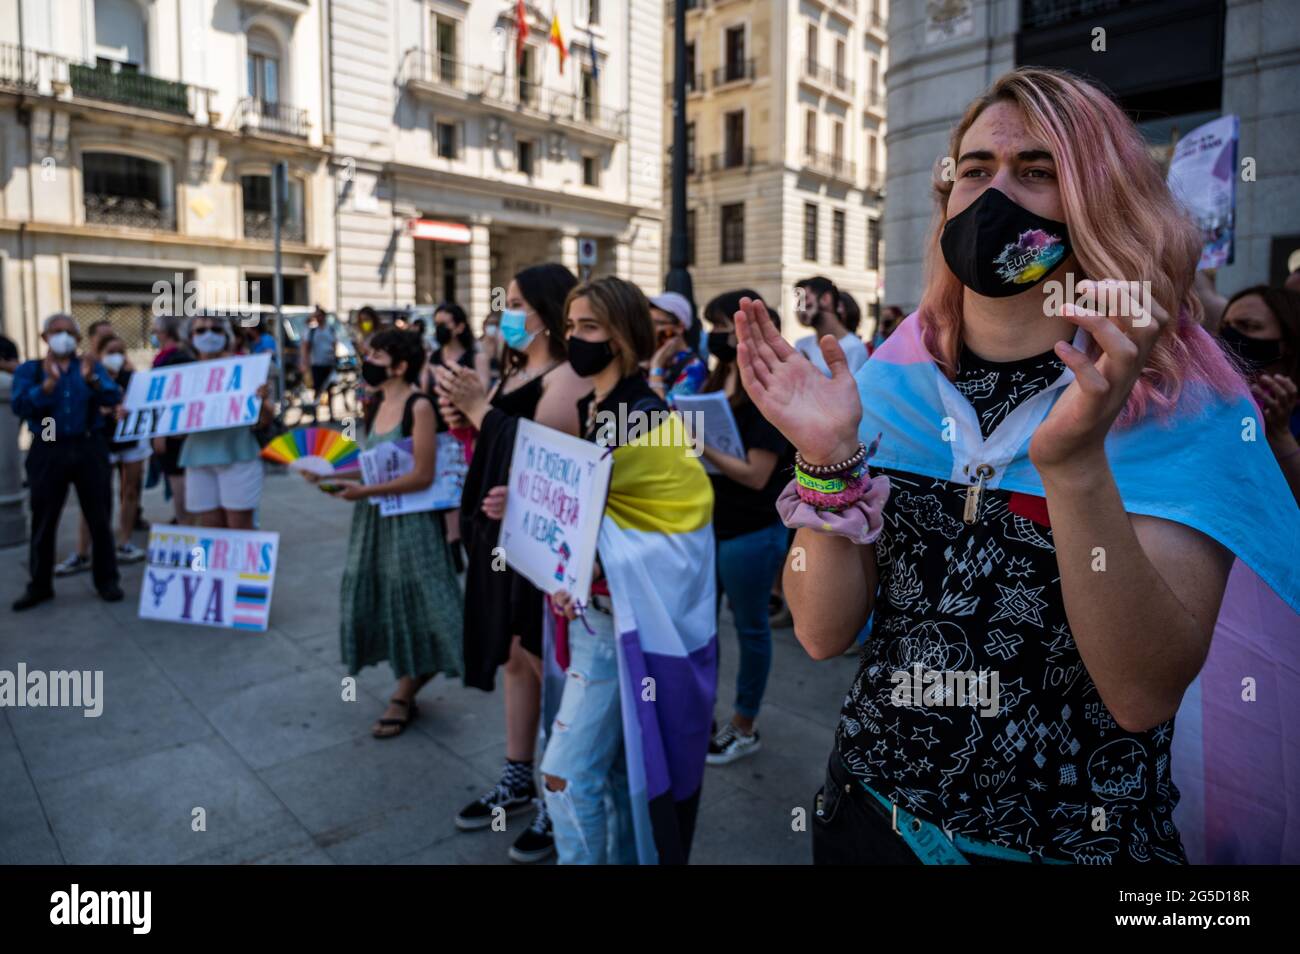 Madrid, Spain. 26th June, 2021. Protester during a demonstration against transphobia.The Spanish Congress will approve a bill that would allow the legal recognition of self-determination in gender matters. Credit: Marcos del Mazo/Alamy Live News Stock Photo